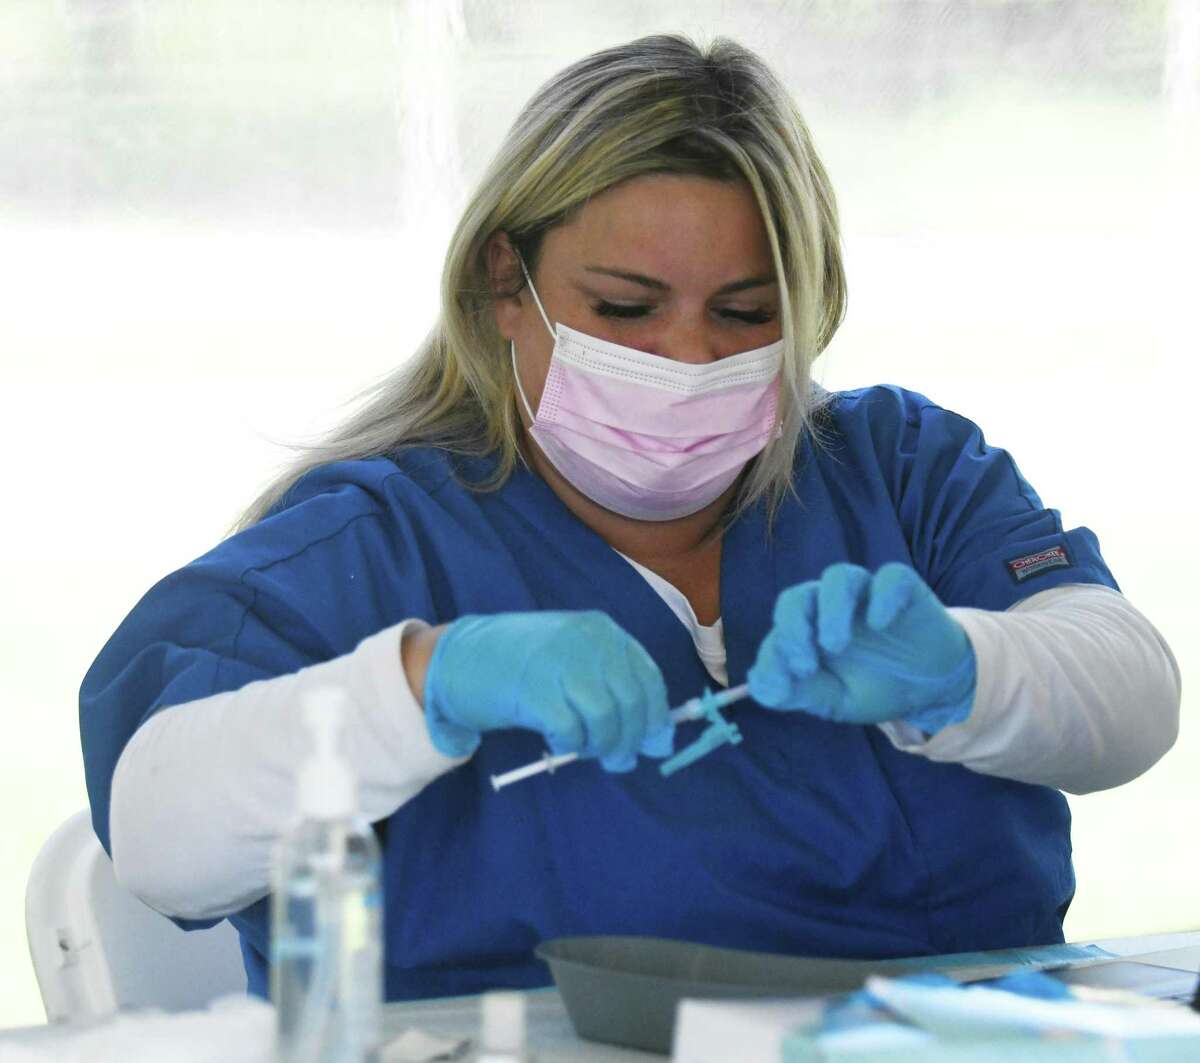 Vaccinator Mary-Kate Lamoult prepares the Pfizer COVID-19 vaccine at the Vaccination Clinic at Boccuzzi Park in Stamford, Conn. Thursday, May 13, 2021. Vaccines are being offered free of charge May 9 through May 15 thanks to a partnership between Griffin Health and the City of Stamford.